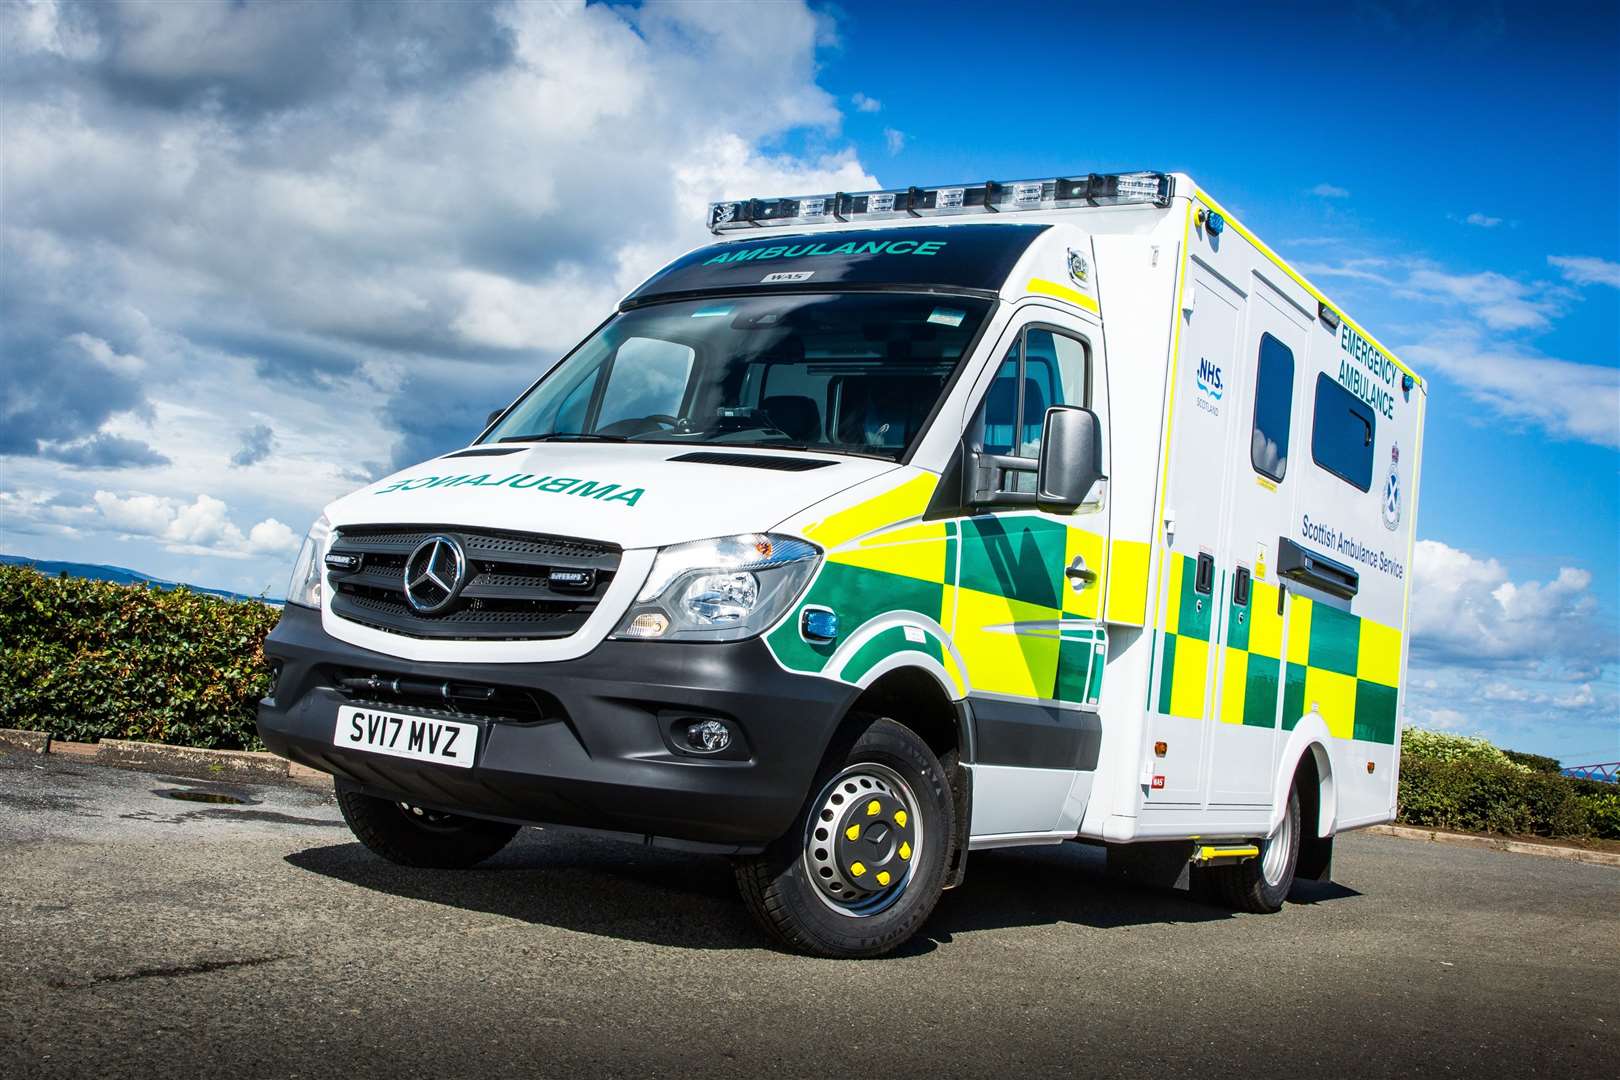 The issue of ambulance waiting times has been highlighted by MP David Duguid.